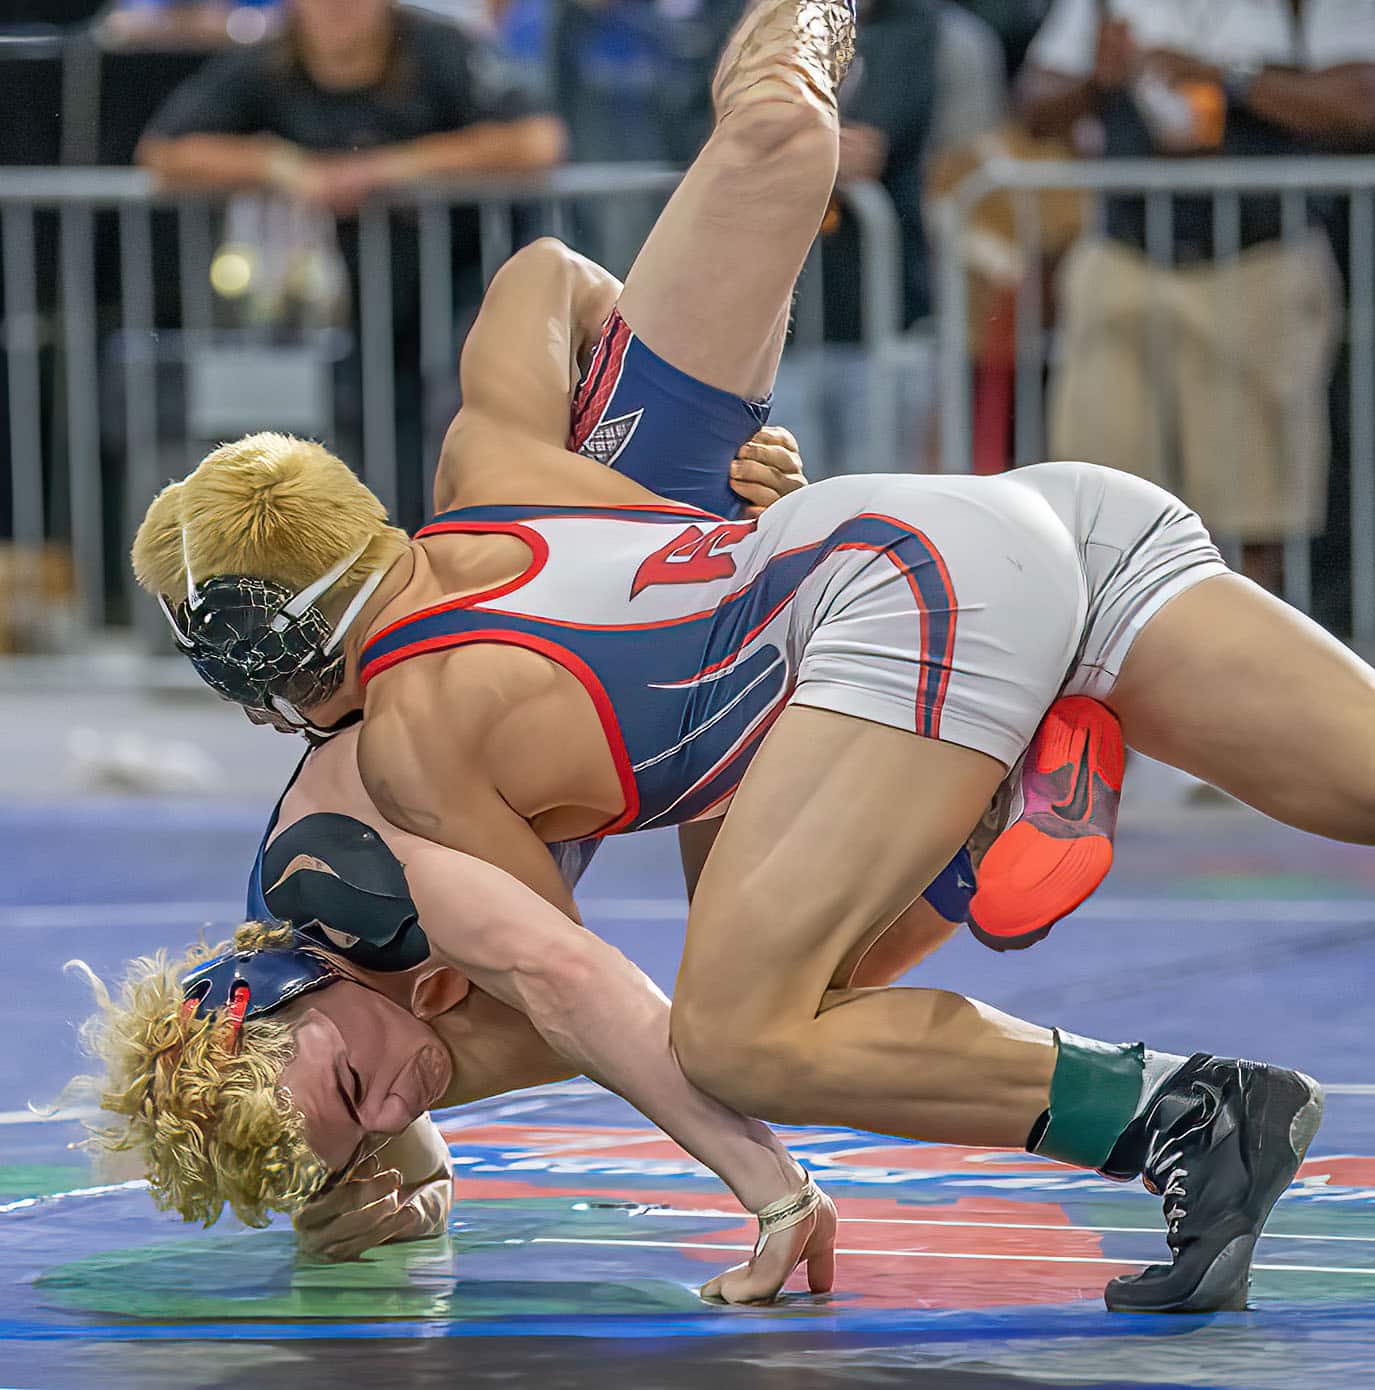 Springstead High’s 138-pound competitor, Josh Gallo turned the table on Austin Chang from Freedom High in the last seconds to win 6-4 at the FHSAA IBT Championships in Kissimmee. Photo by JOE DiCRISTOFALO